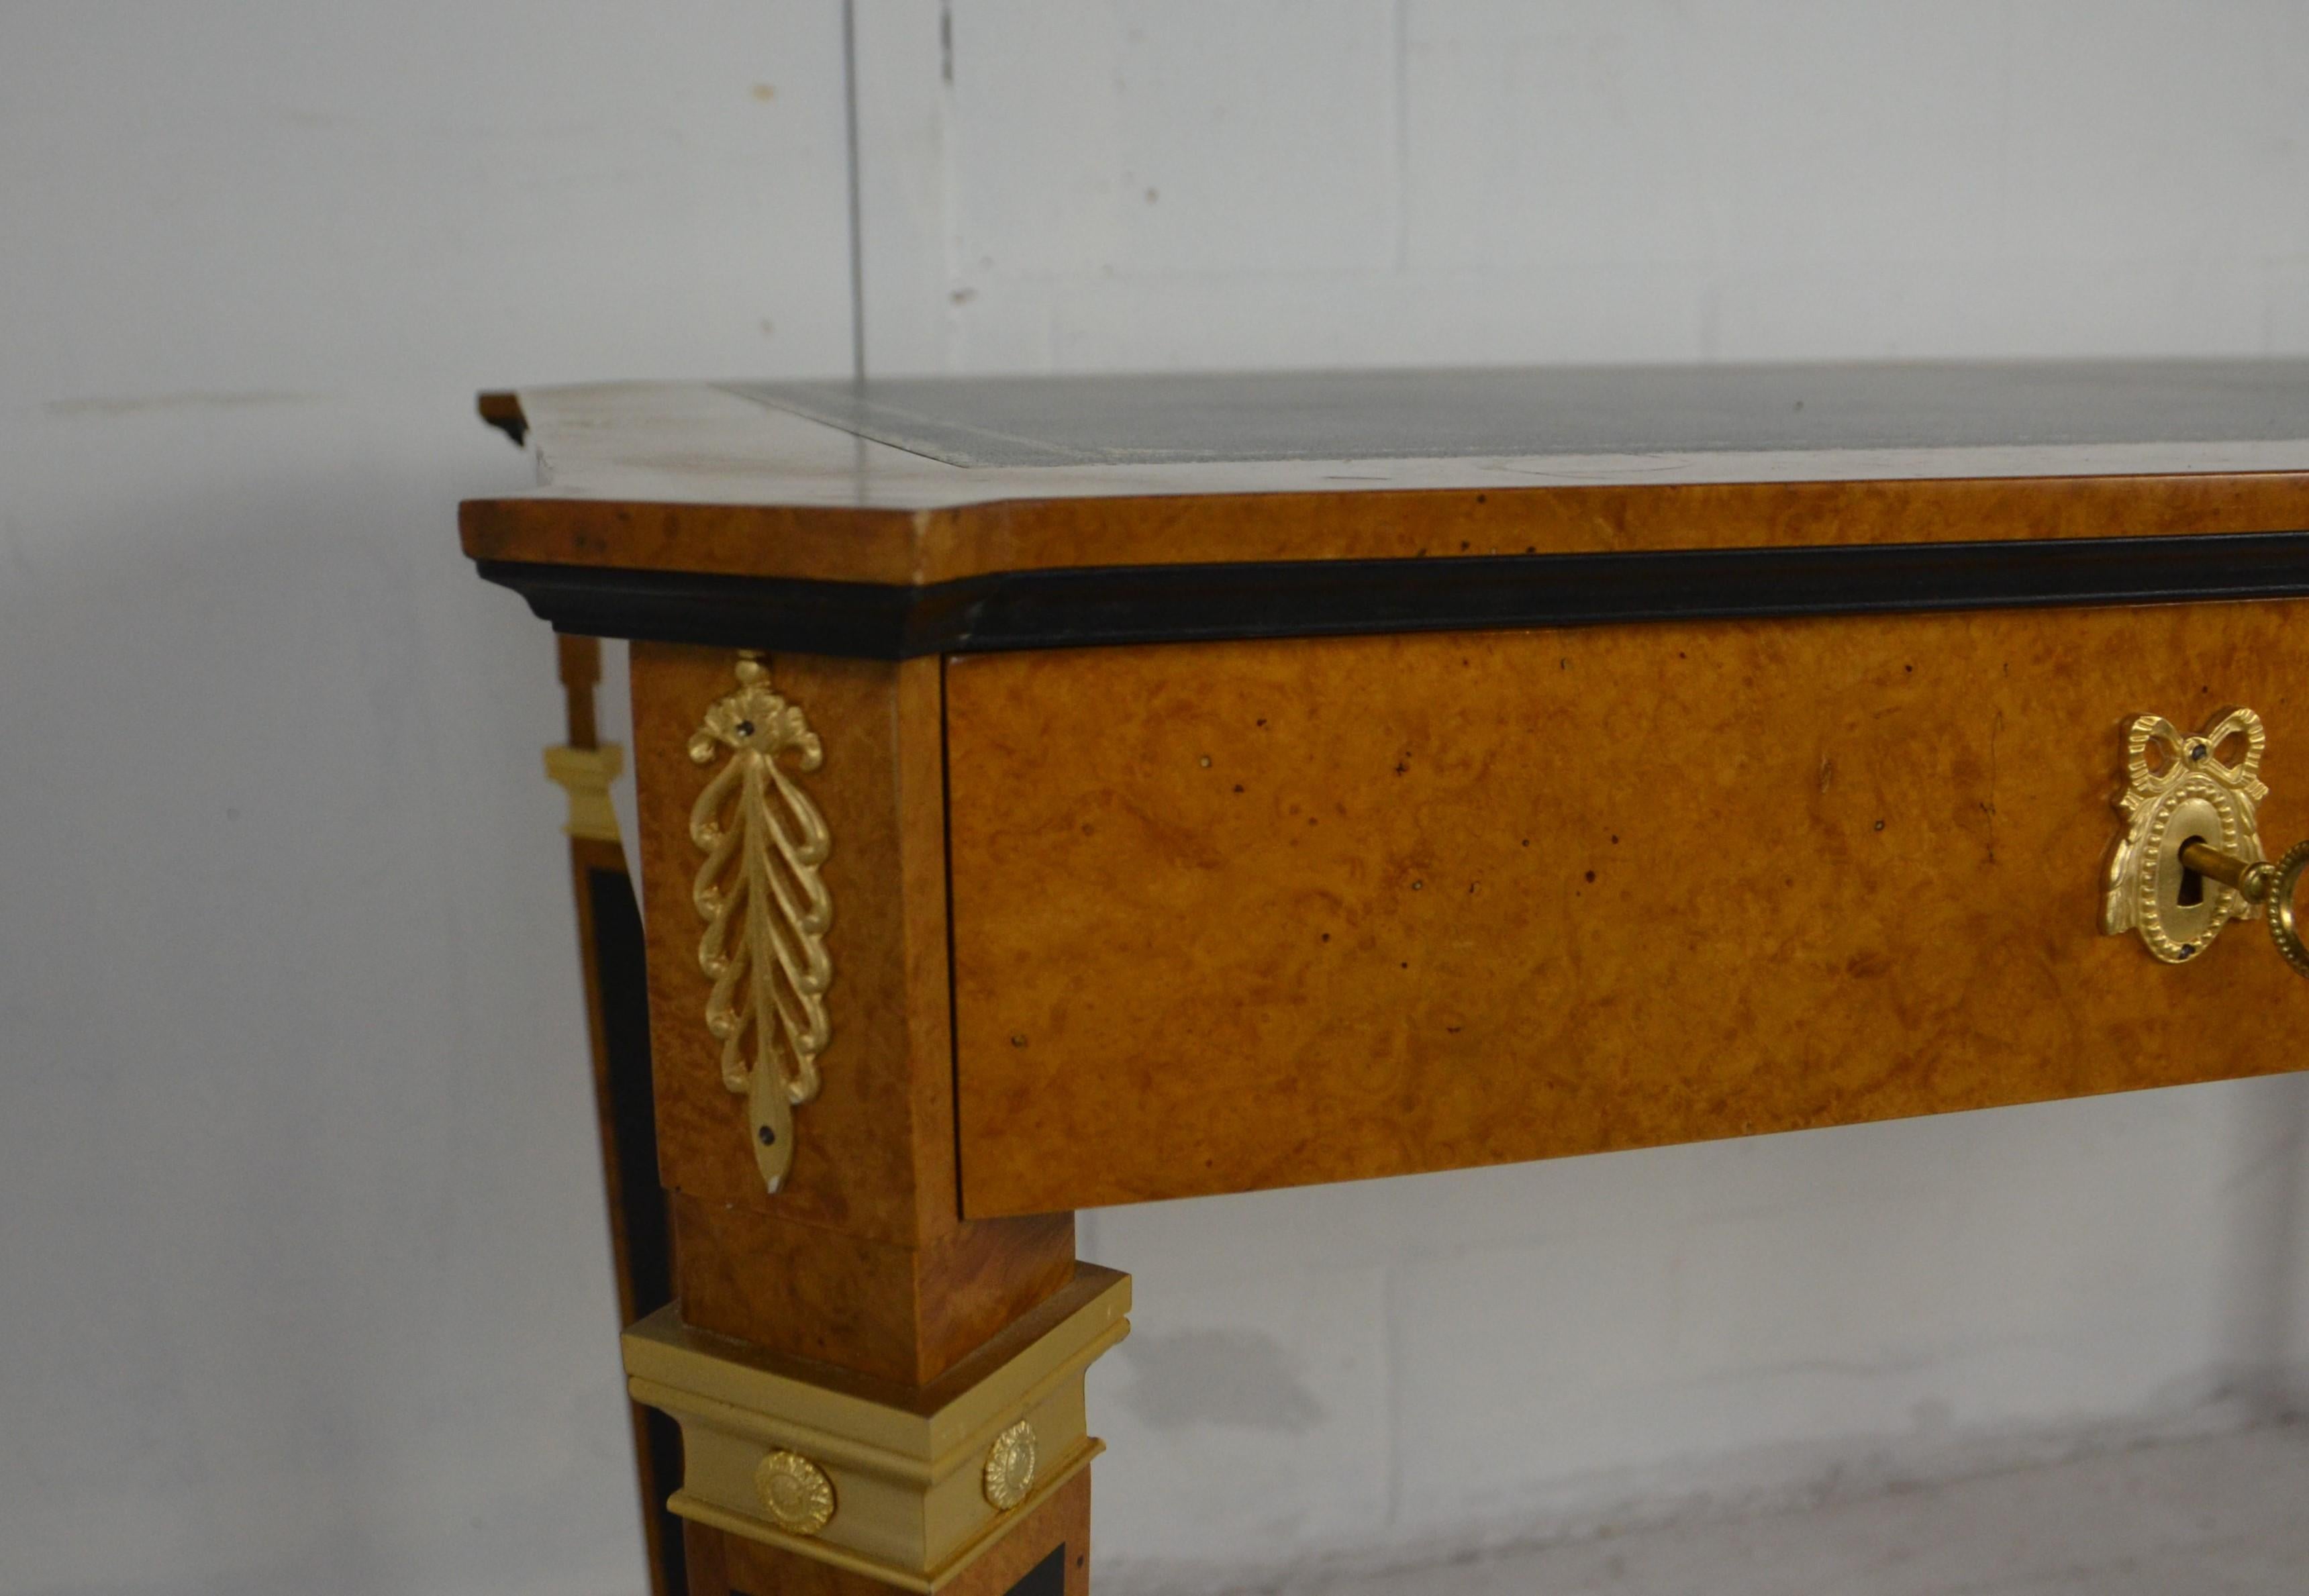 A leather topped burl-wood desk. A light colored burlwood finish with ebonized panels to the legs. Gilt metal decorations to drawers, back, legs and corners. Features a leather writing top with a gold decorated band.